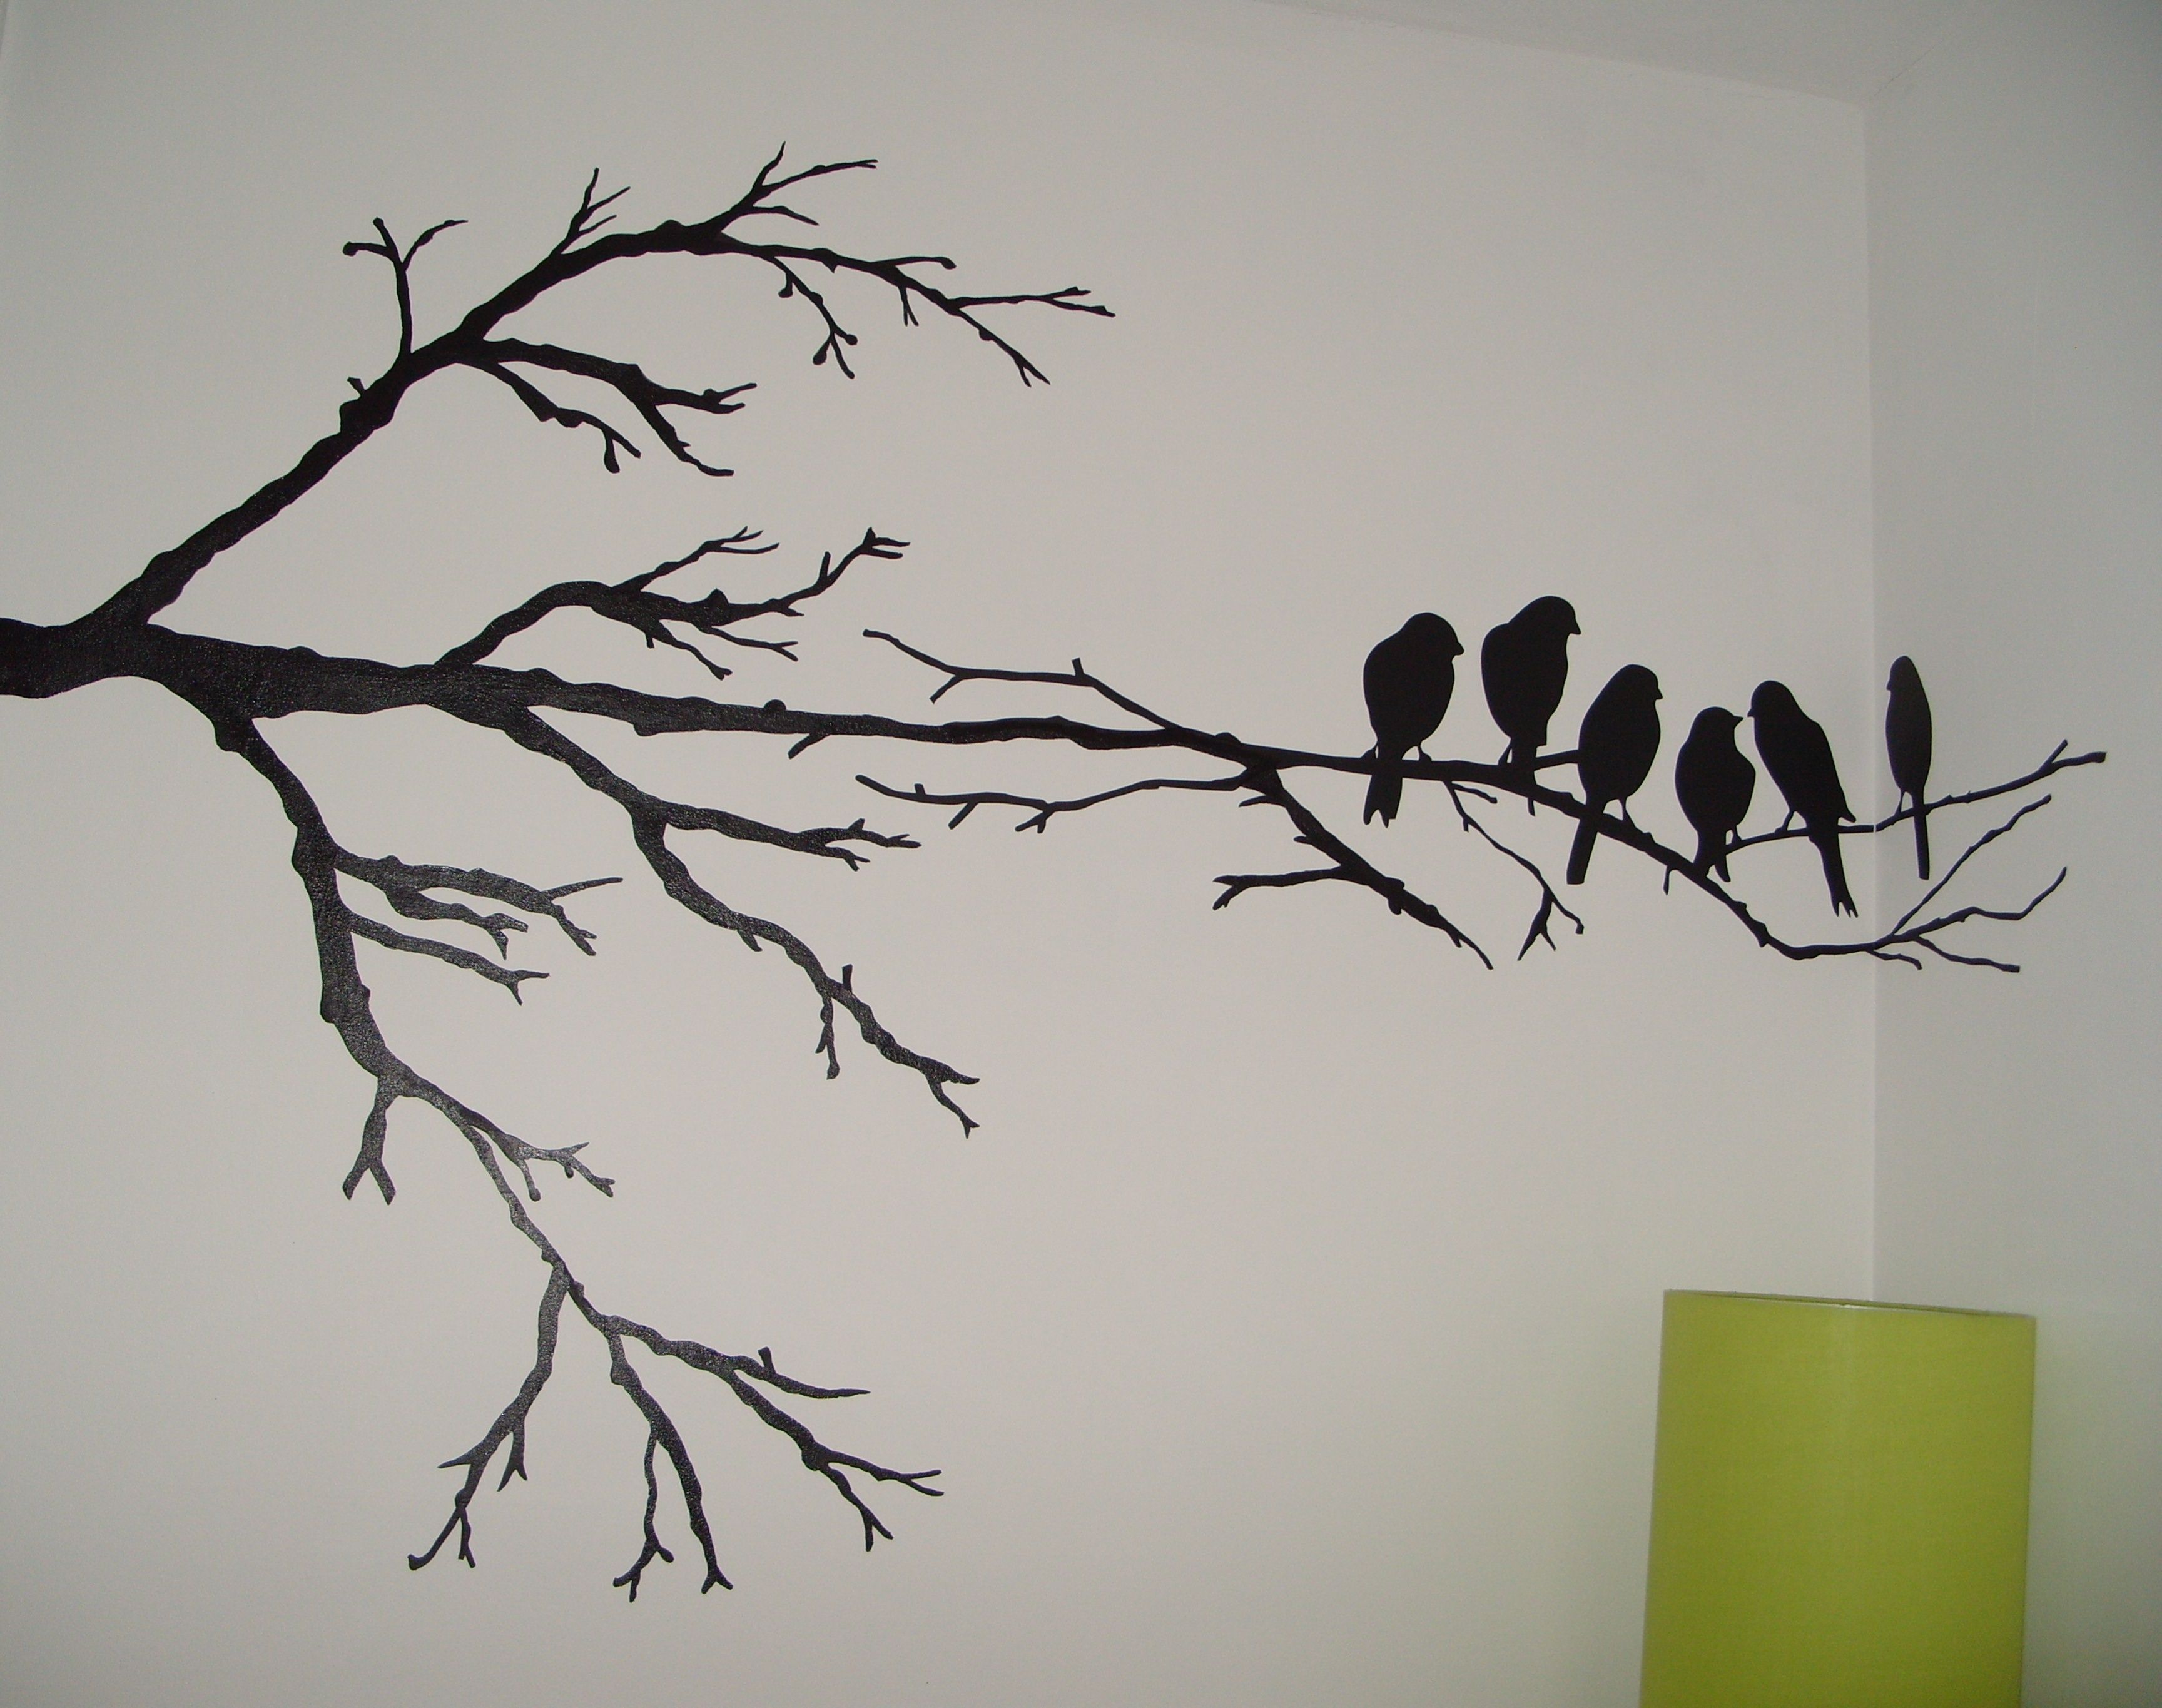 Wall painting. Maybe just one branch and one of the birds an accent ...